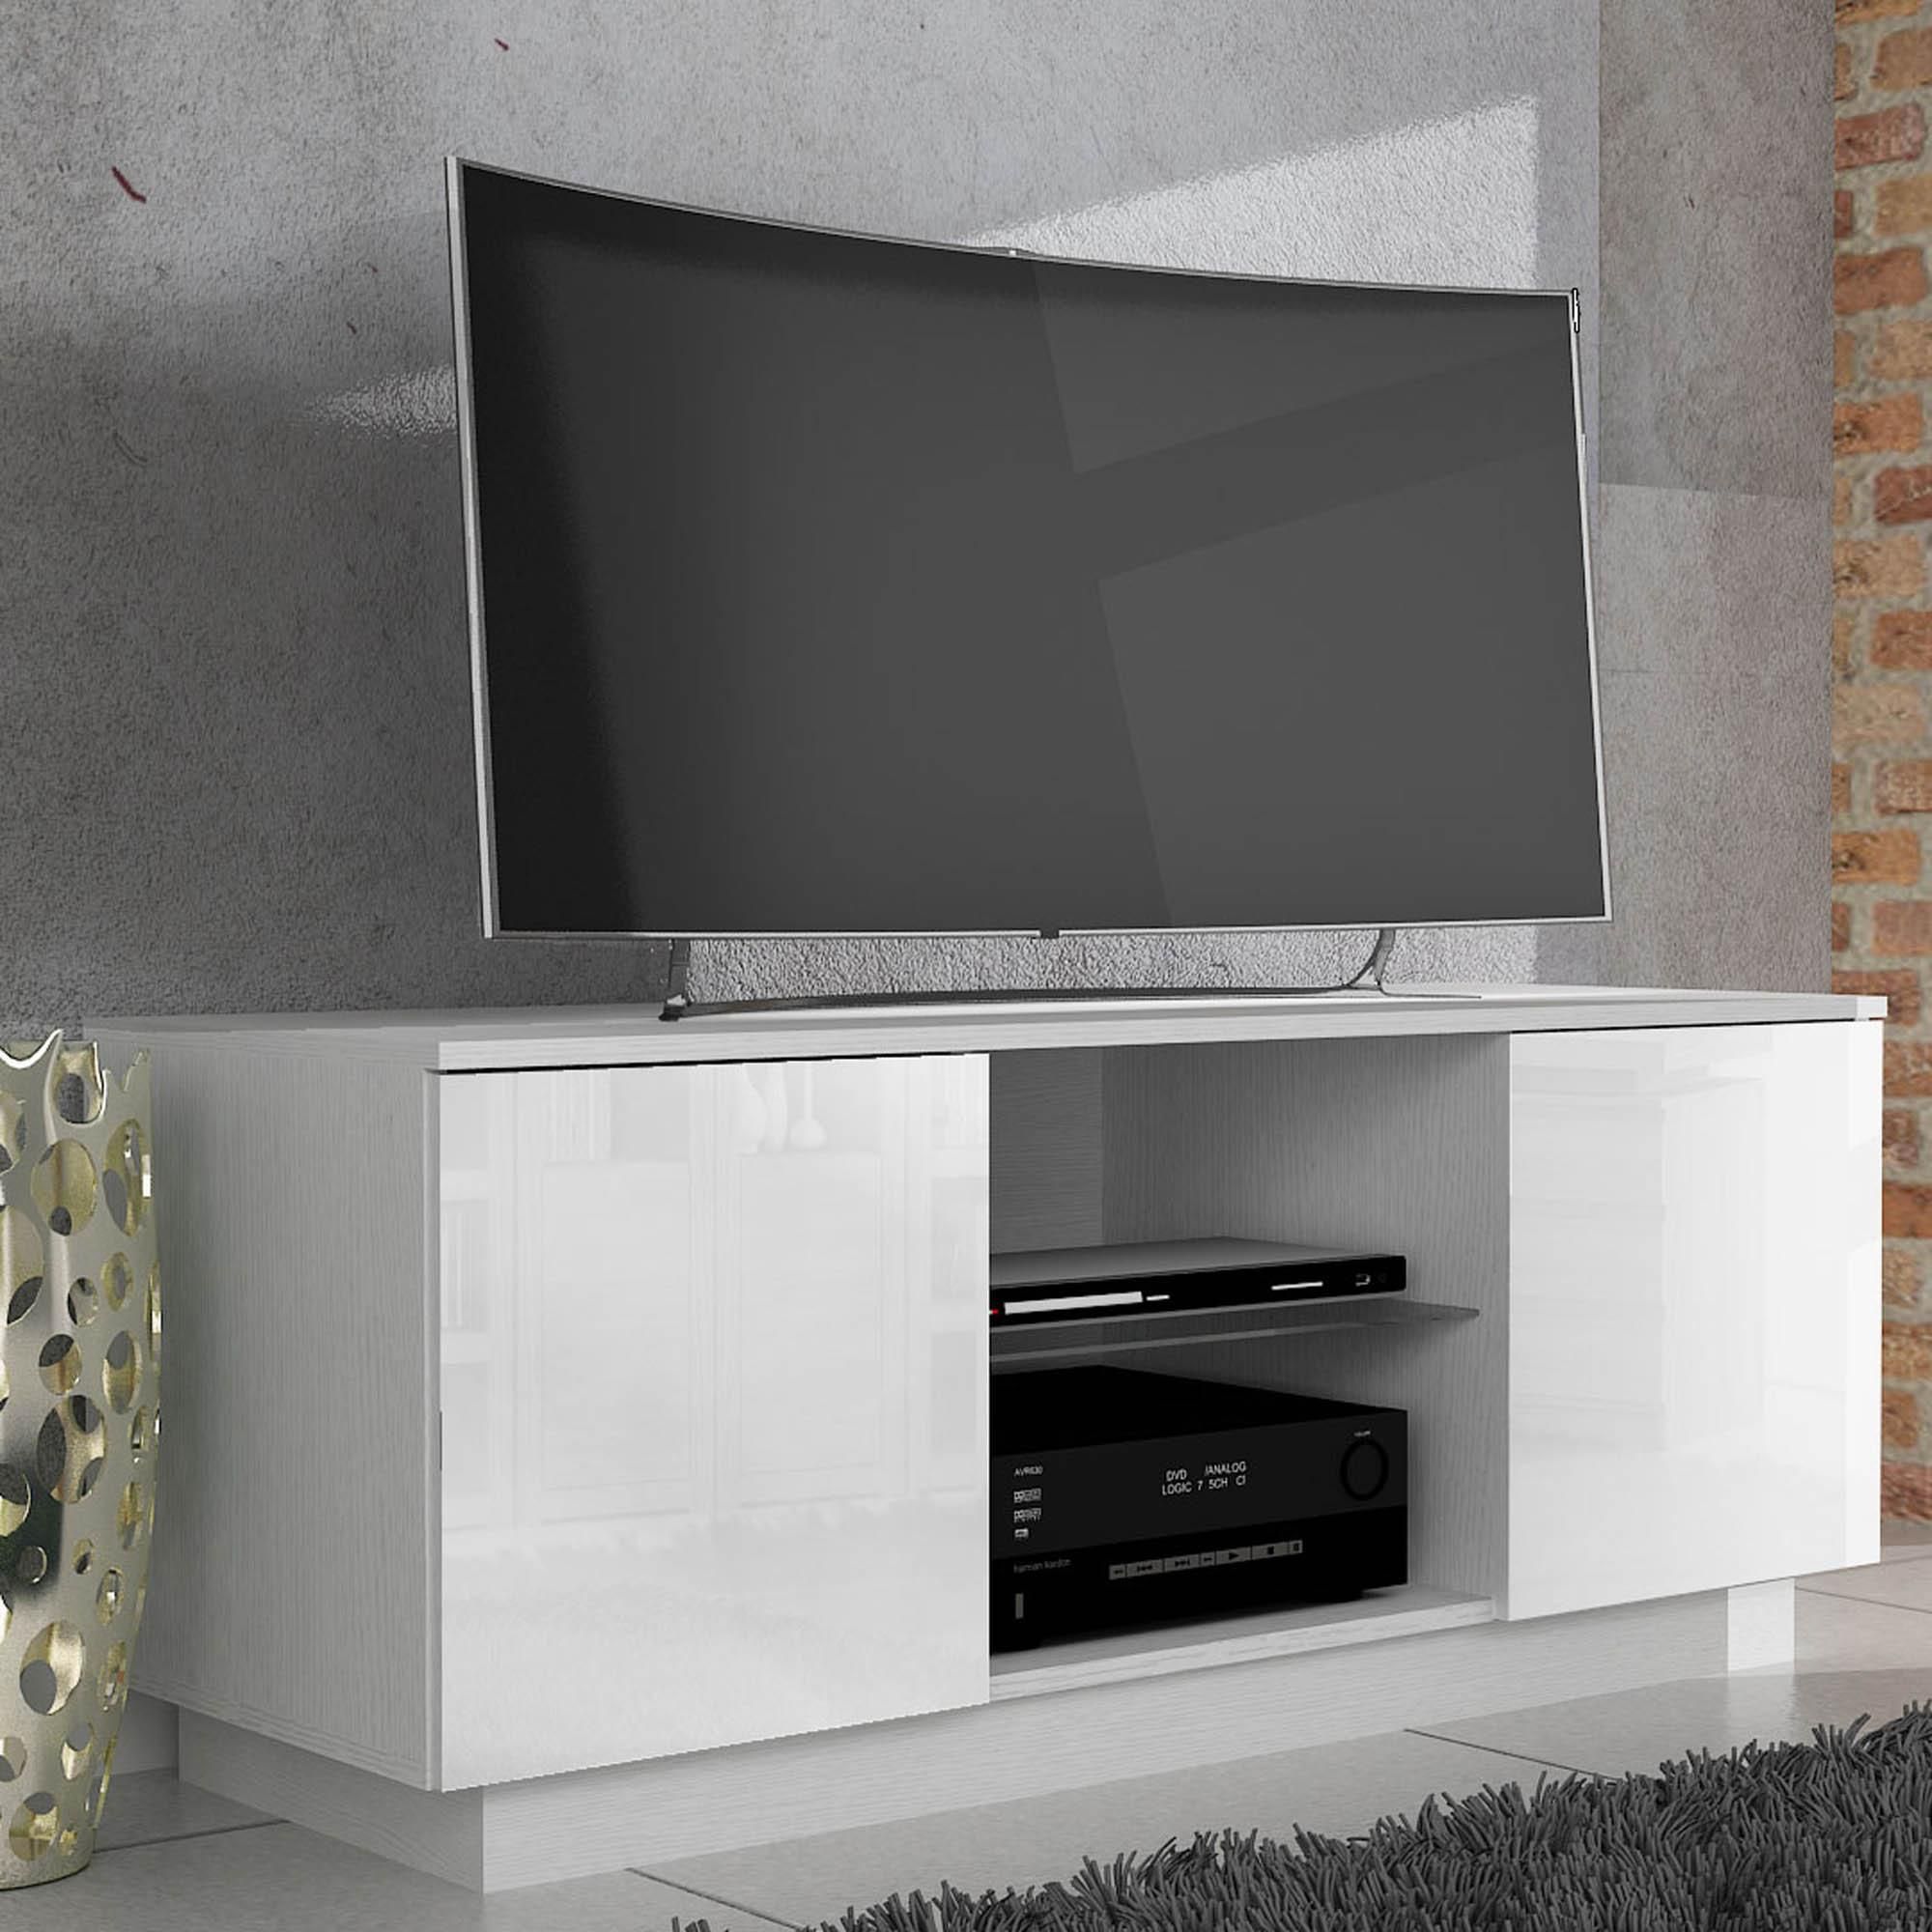 Lima White High Gloss Tv Stand | Tv Stand, High Gloss Tv For White Wood Tv Stands (View 2 of 15)